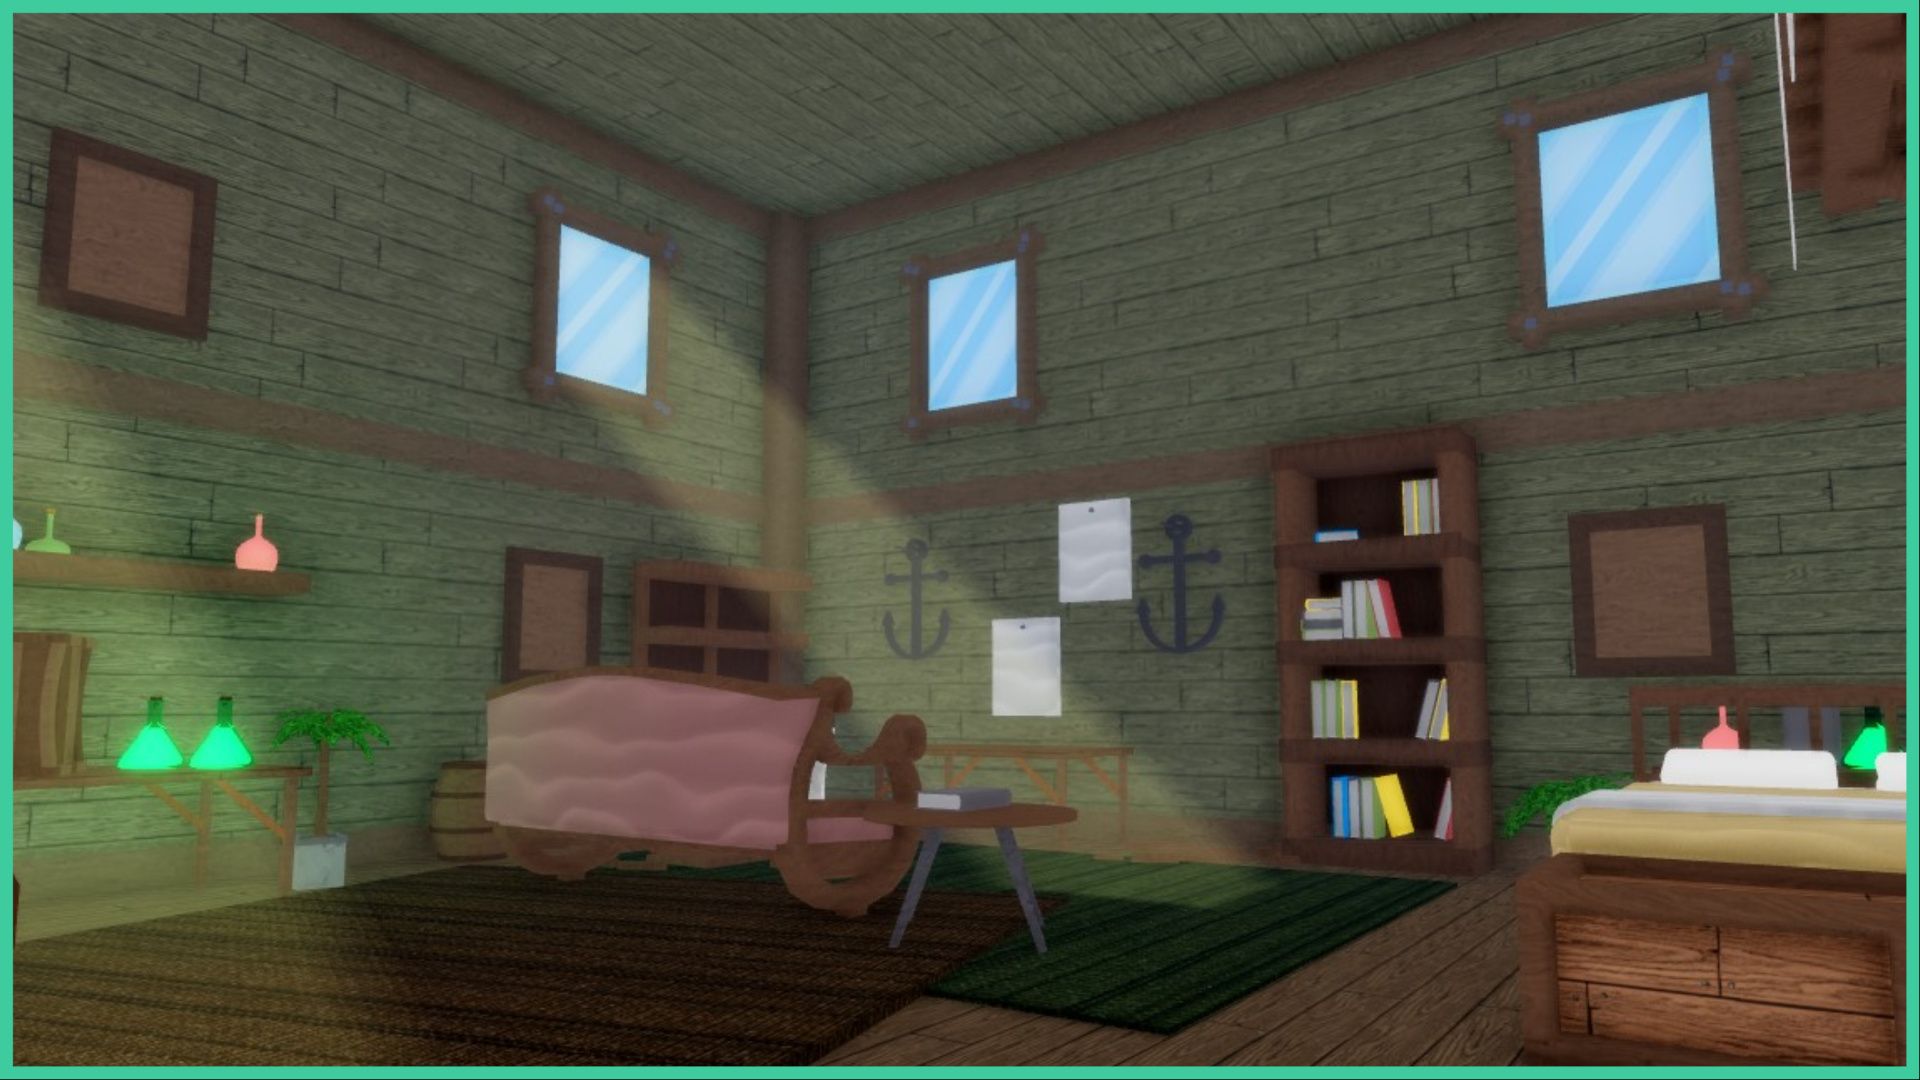 feature image for our legacy piece races guide, the image is a screenshot of the inside of one of the buildings in the game, with sun pouring in through the window to light up the living space where a sofa and table with a book stands, there's a bookshelf and a bed, with a shelf that has glowing potion bottles on it, there are also two metal anchors on the wall, and multiple square windows close to the ceiling